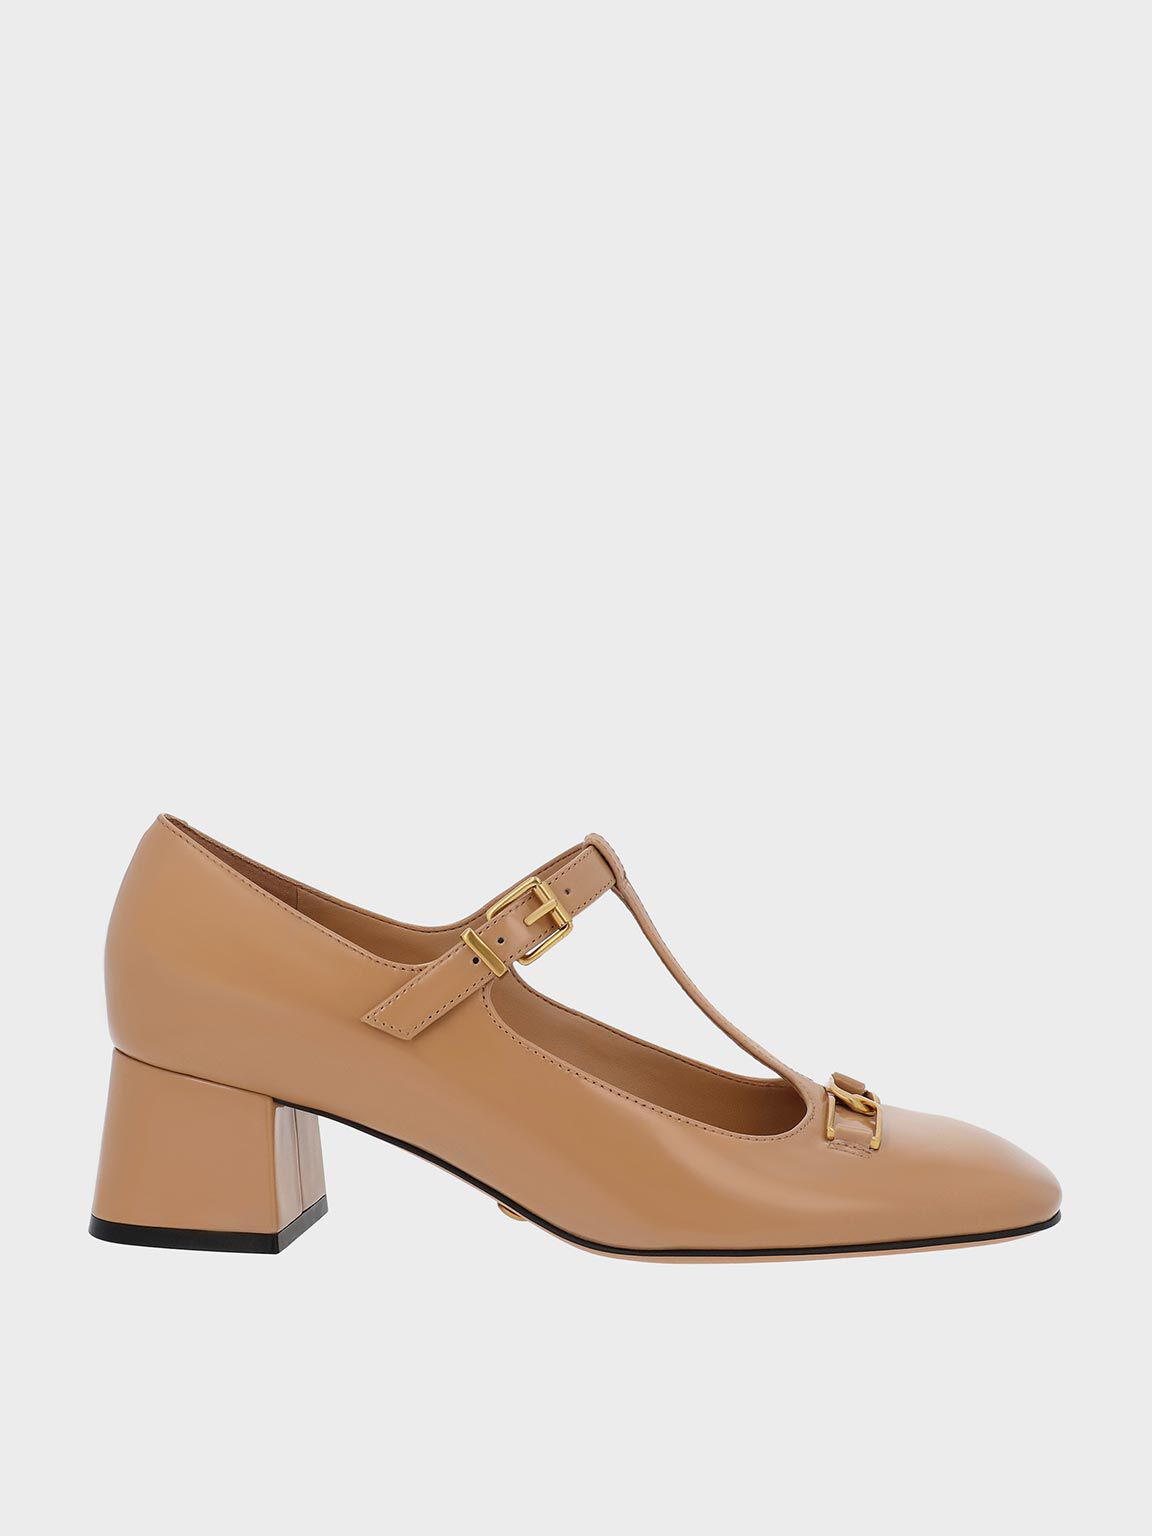 Women’s New Arrivals | Shop Latest Styles | CHARLES & KEITH SG